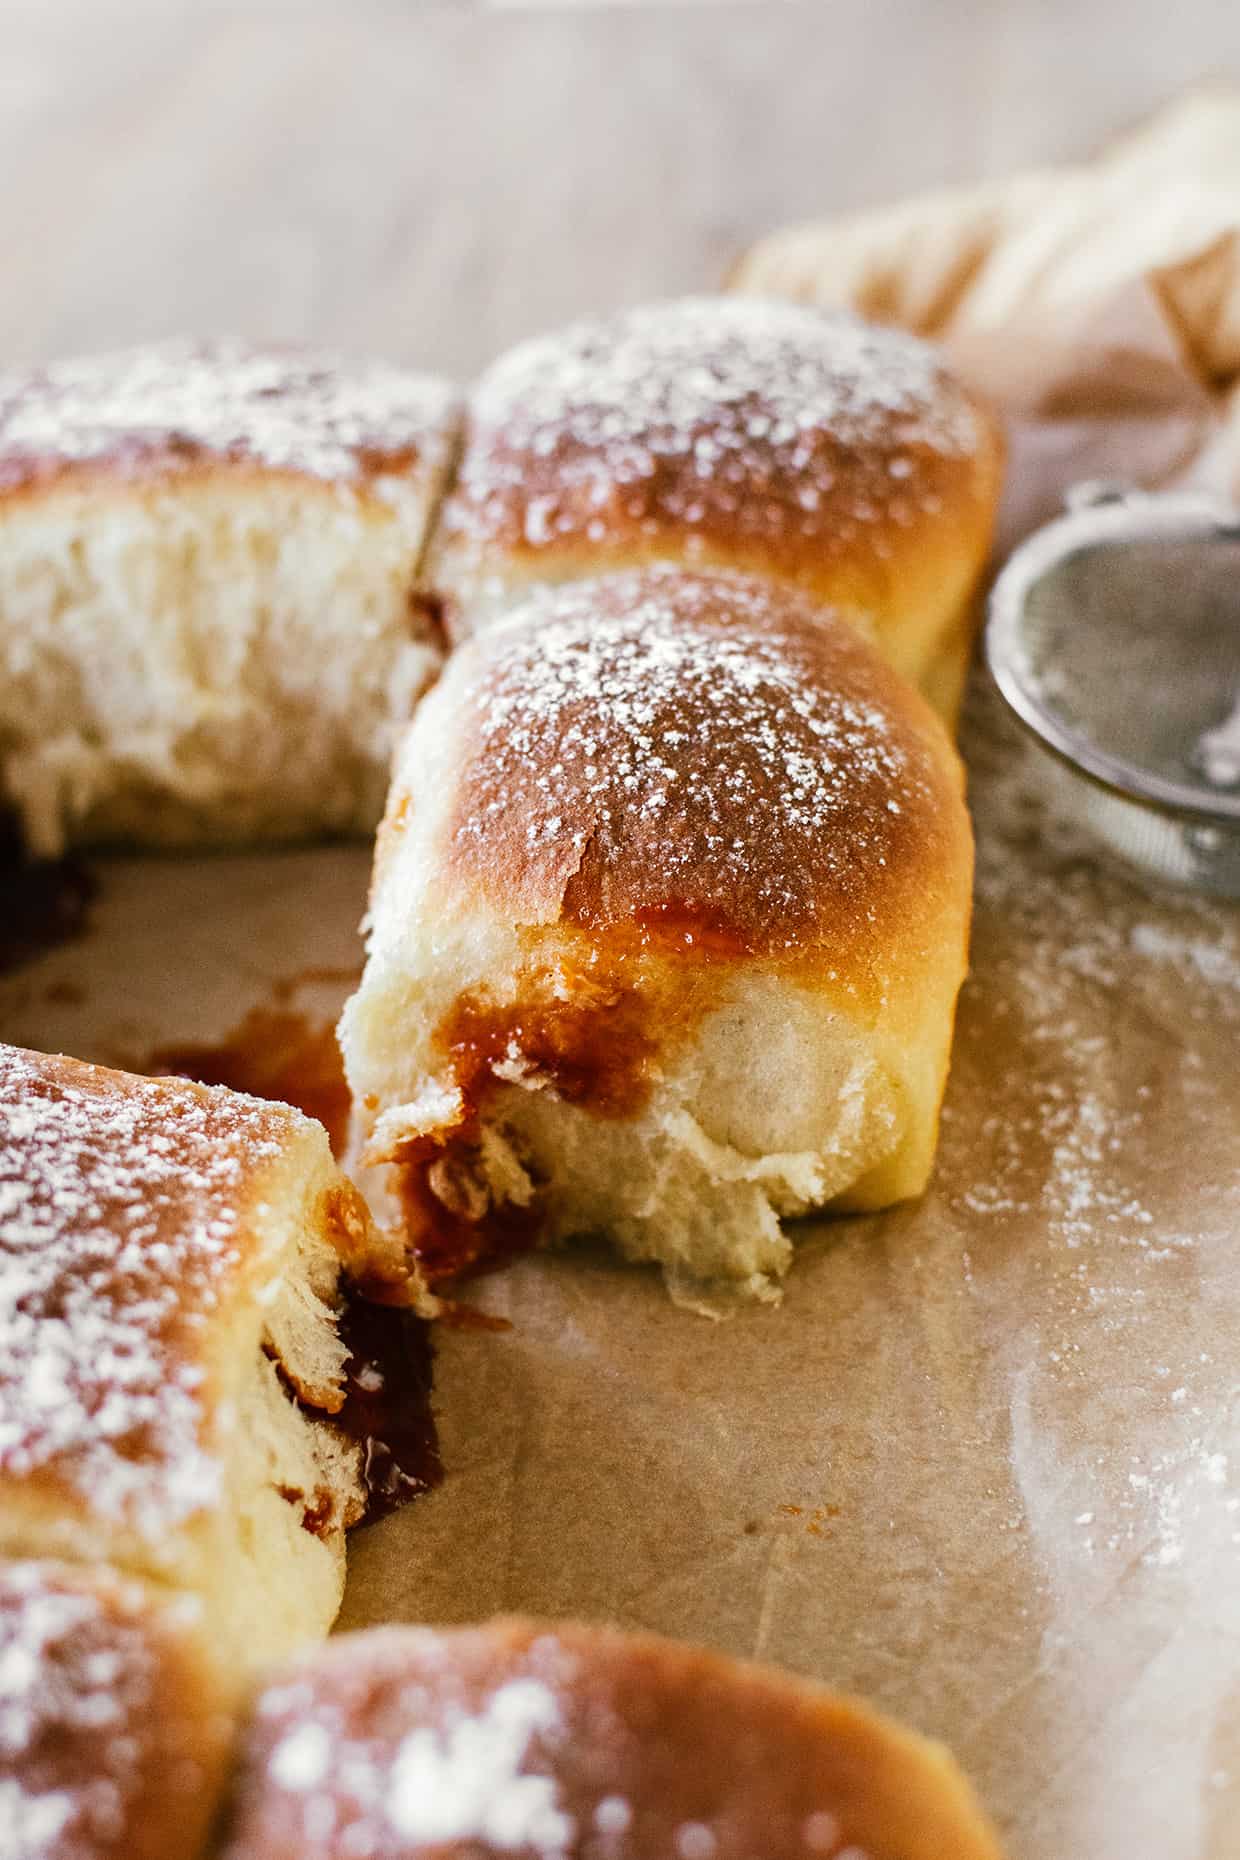 Close view of a baked bread roll, sprinkled with sugar and with jam dripping down in the front.